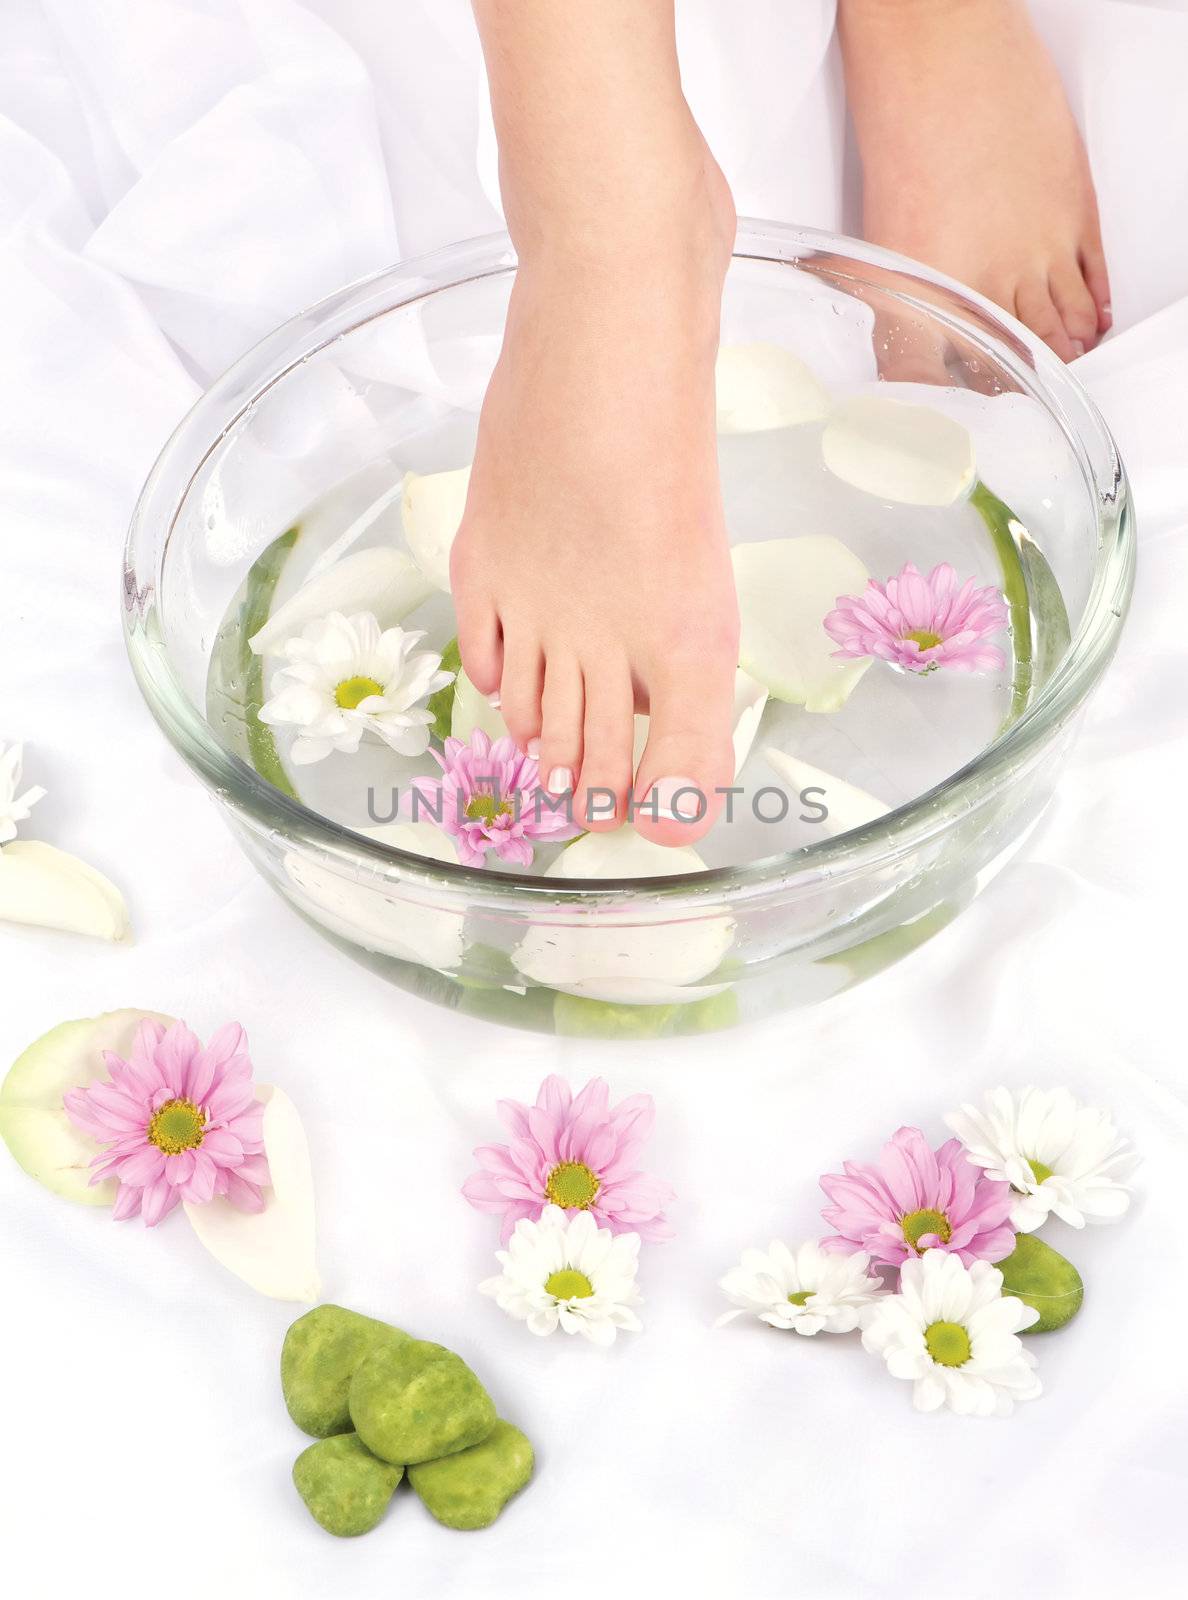 Feet in aromatherapy bowl by imarin